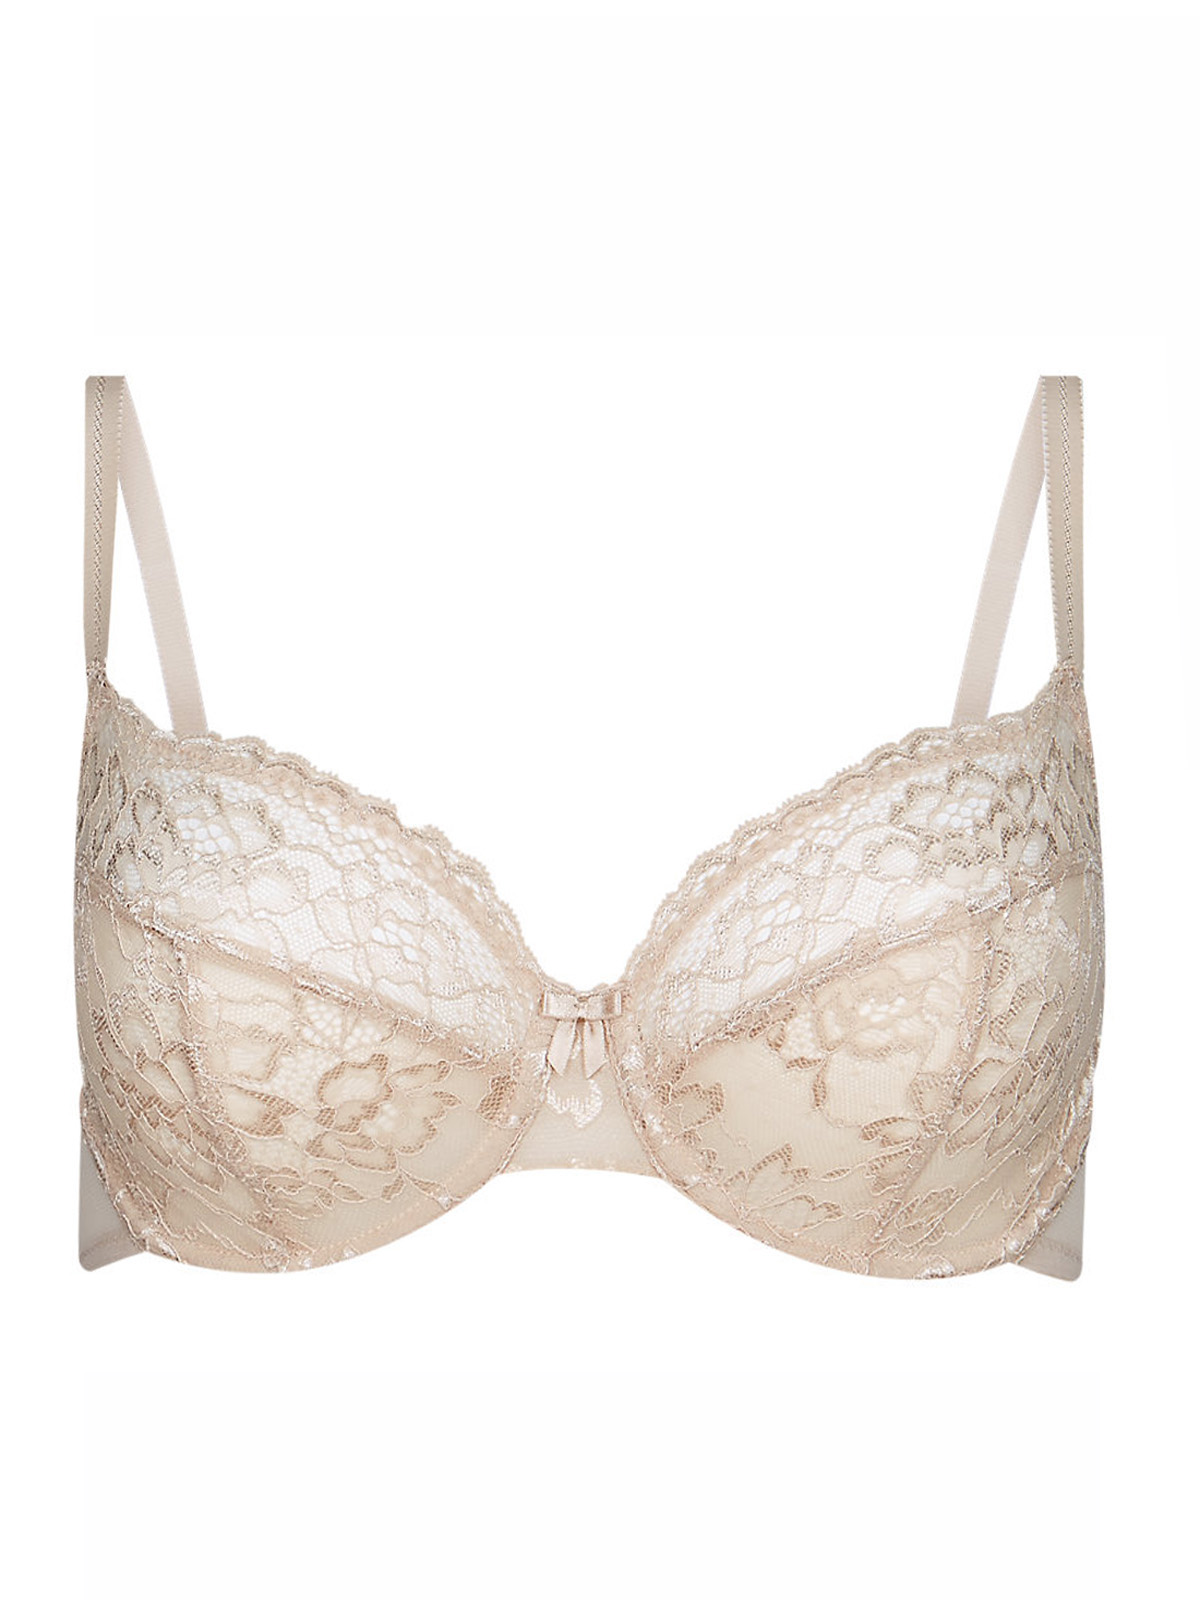 Marks and Spencer - - M&5 ALMOND Non-Padded Lace Full Cup Bra - Size 34 ...